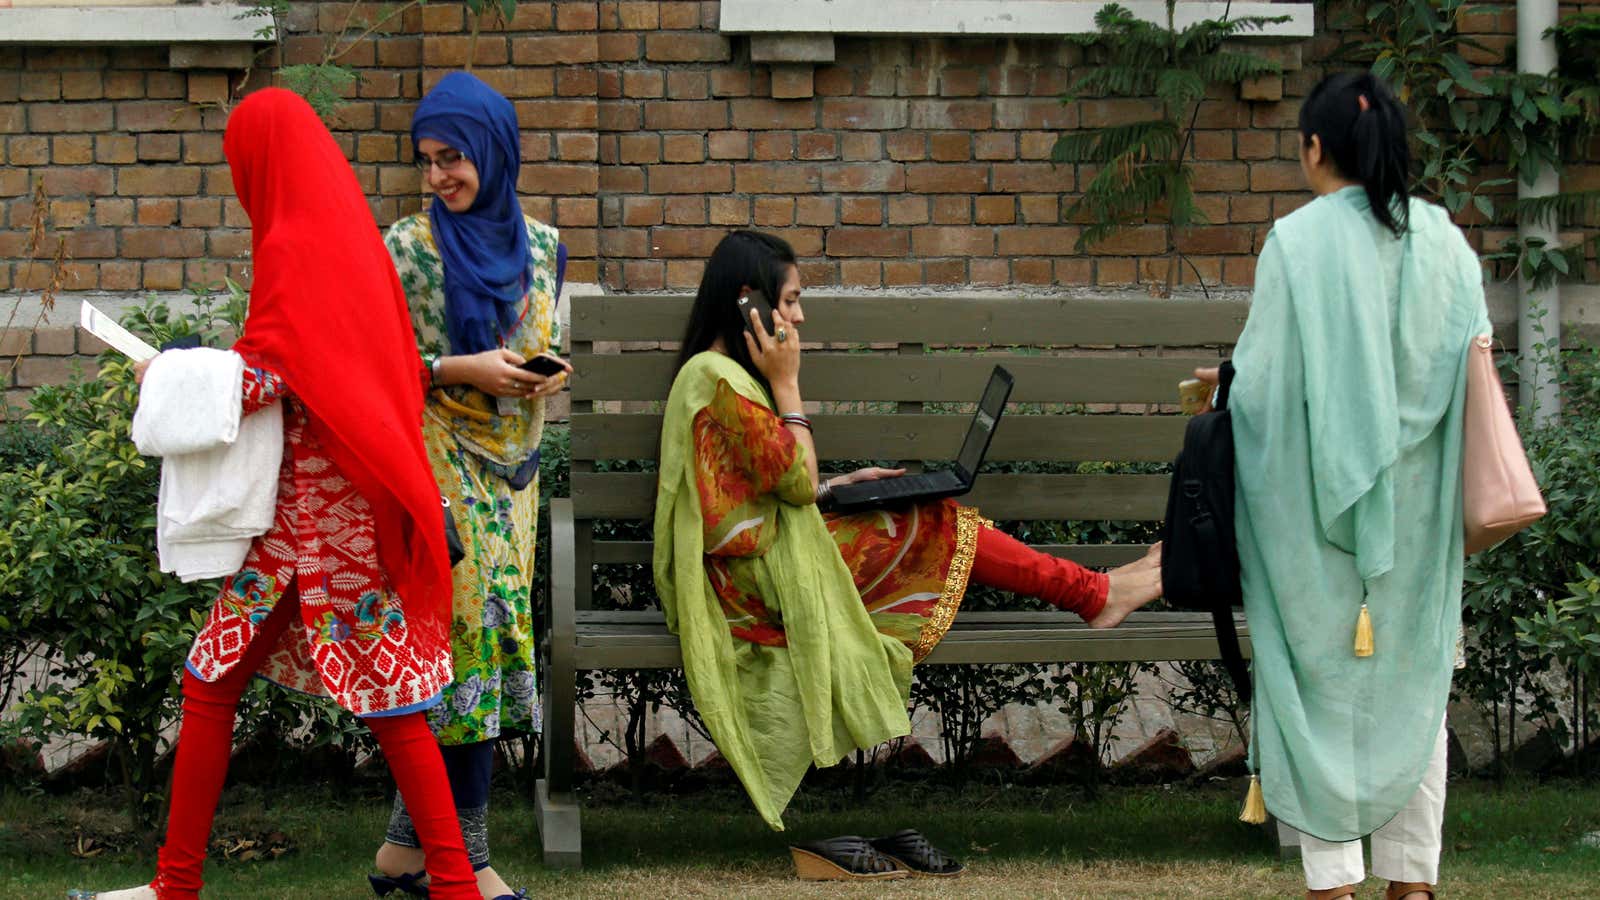 A student works on her computer sitting on a bench at Shaheed Benazir Bhutto Women’s University in Peshawar.